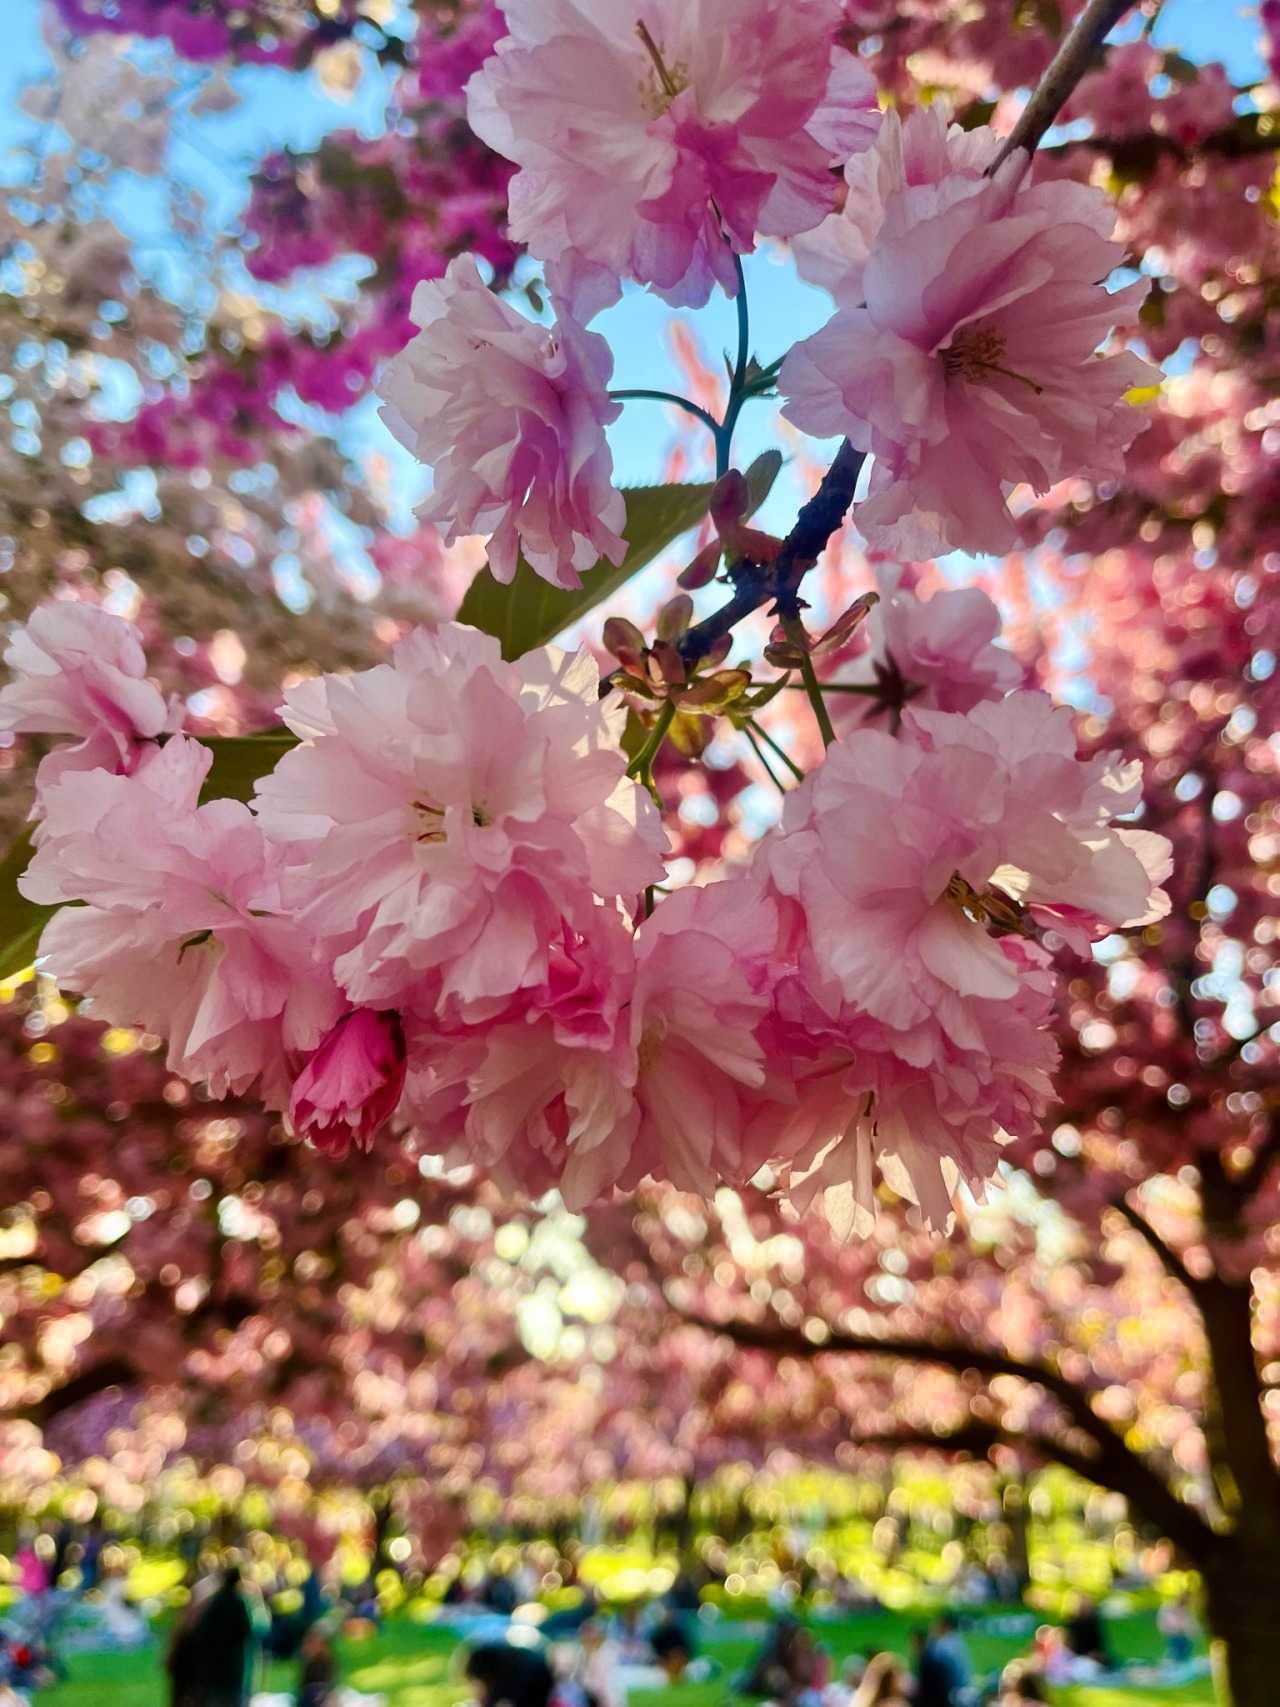 a close up picture of cherry blossoms on a tree. the blossoms are pale and vivid pink and dangle from above. more cherry trees are blurred in the background and dozens of people are sitting on the green grass underneath the treess